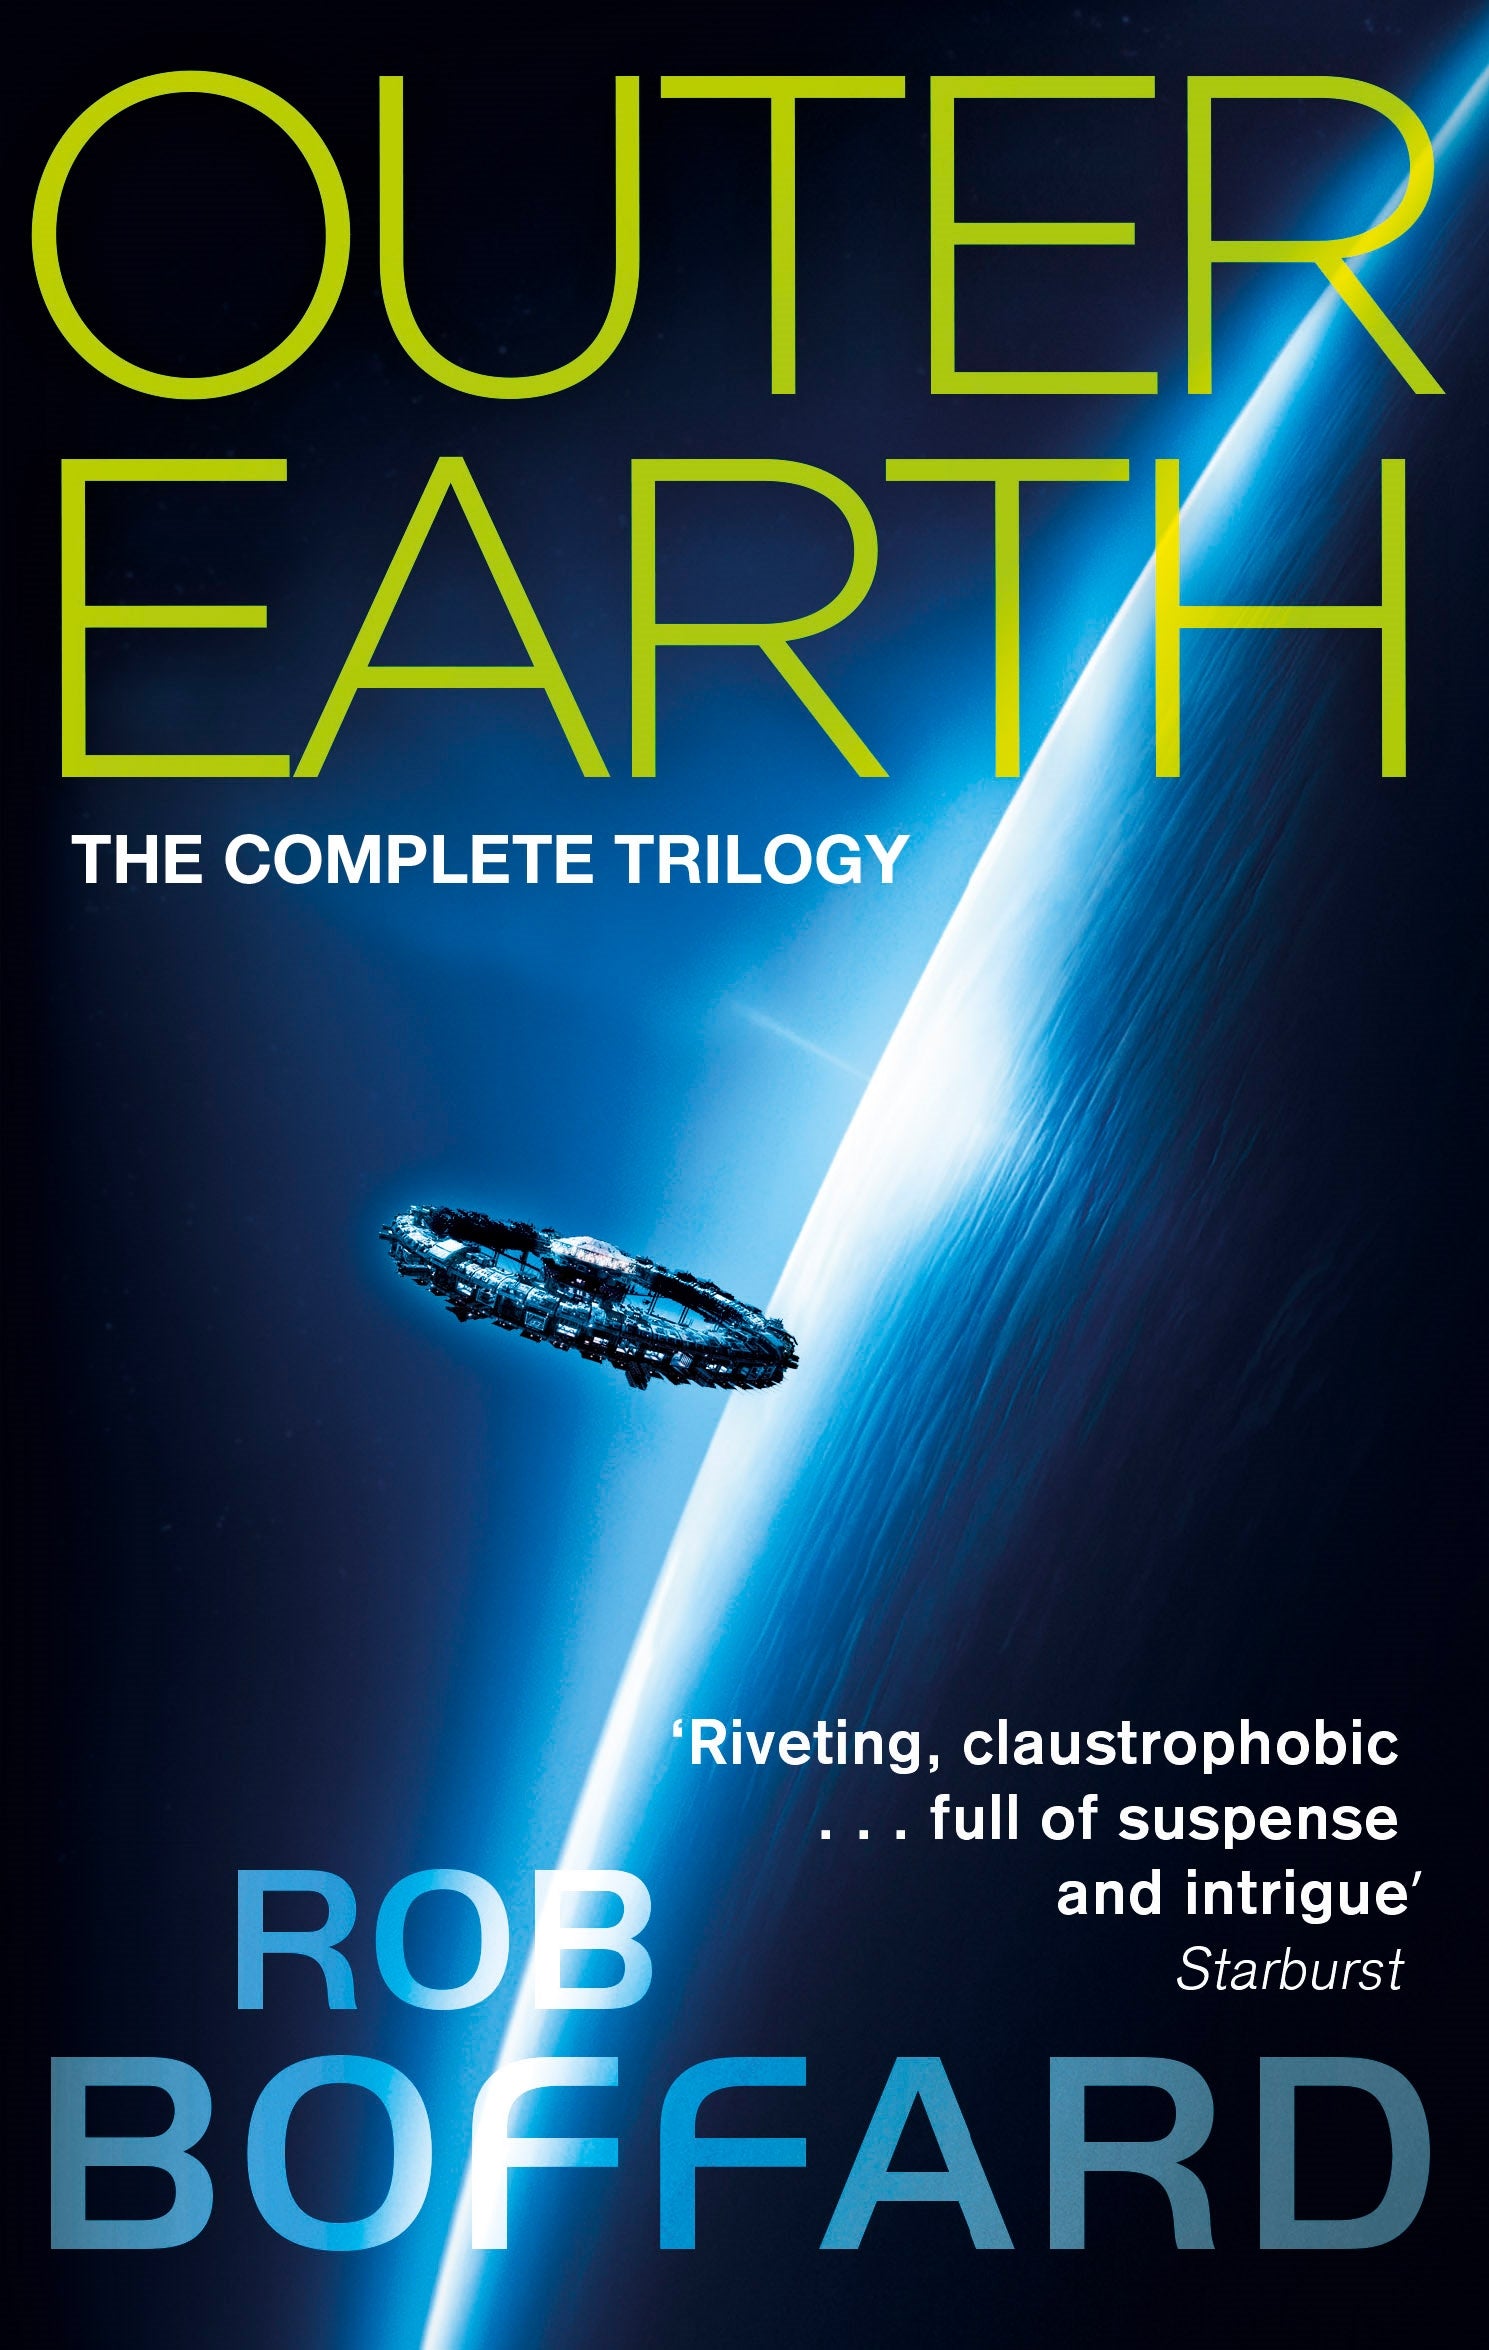 Outer Earth: The Complete Trilogy by Rob Boffard